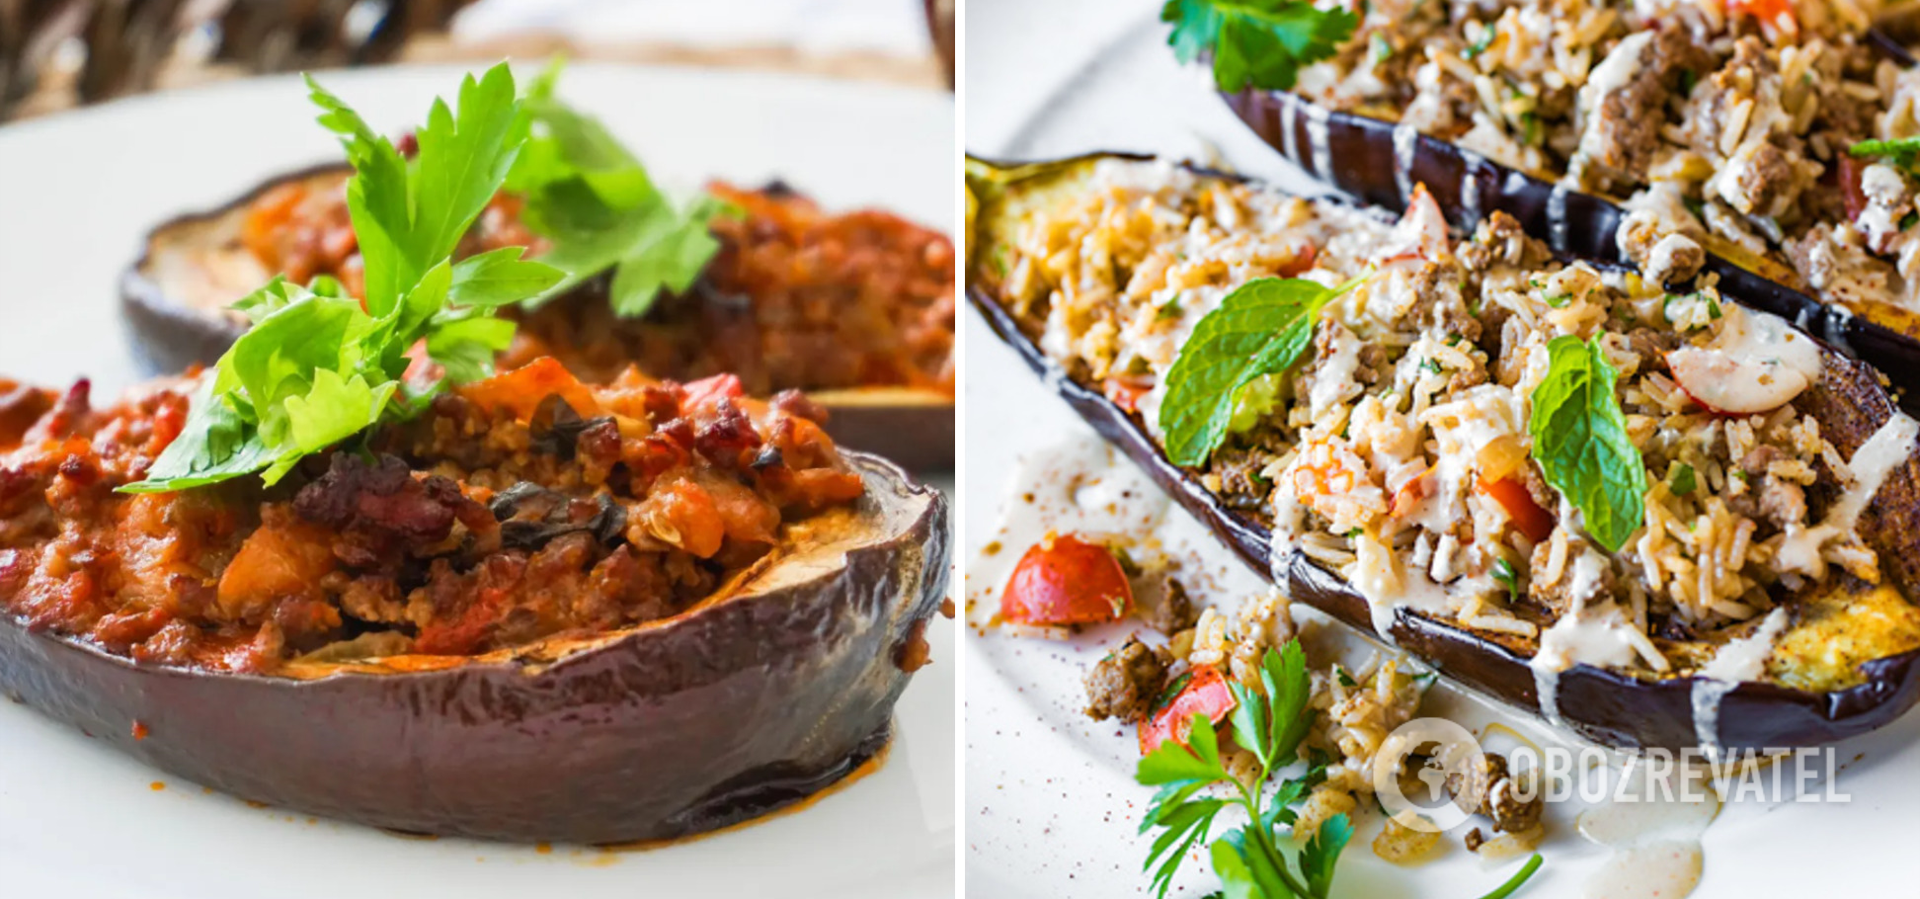 Stuffed eggplant with filo and tomatoes